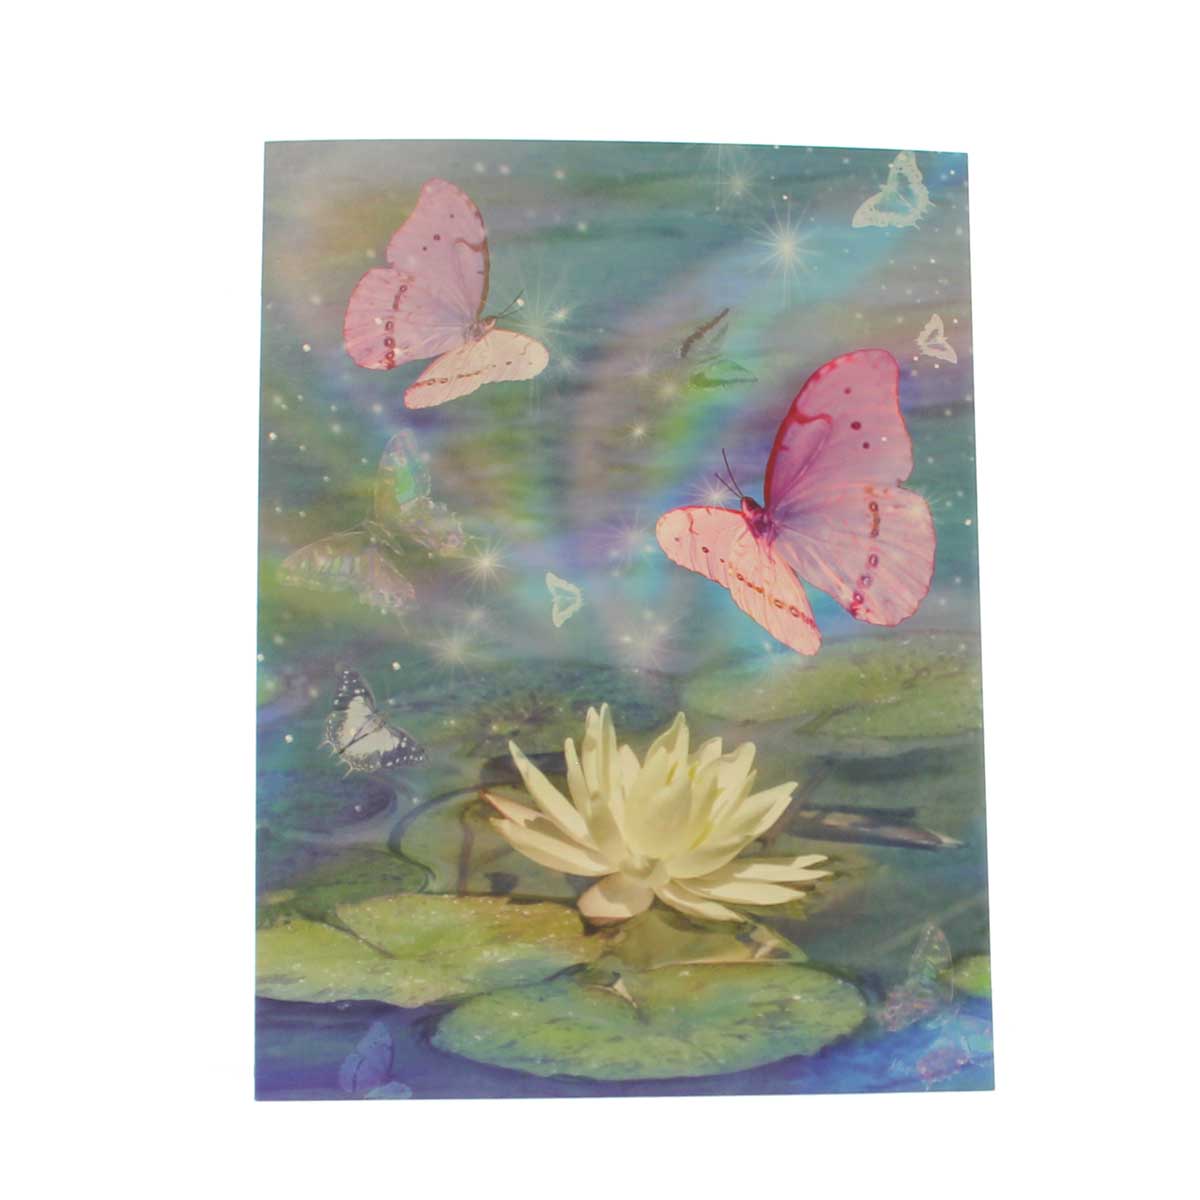 Sympathy Card-image of butterflies